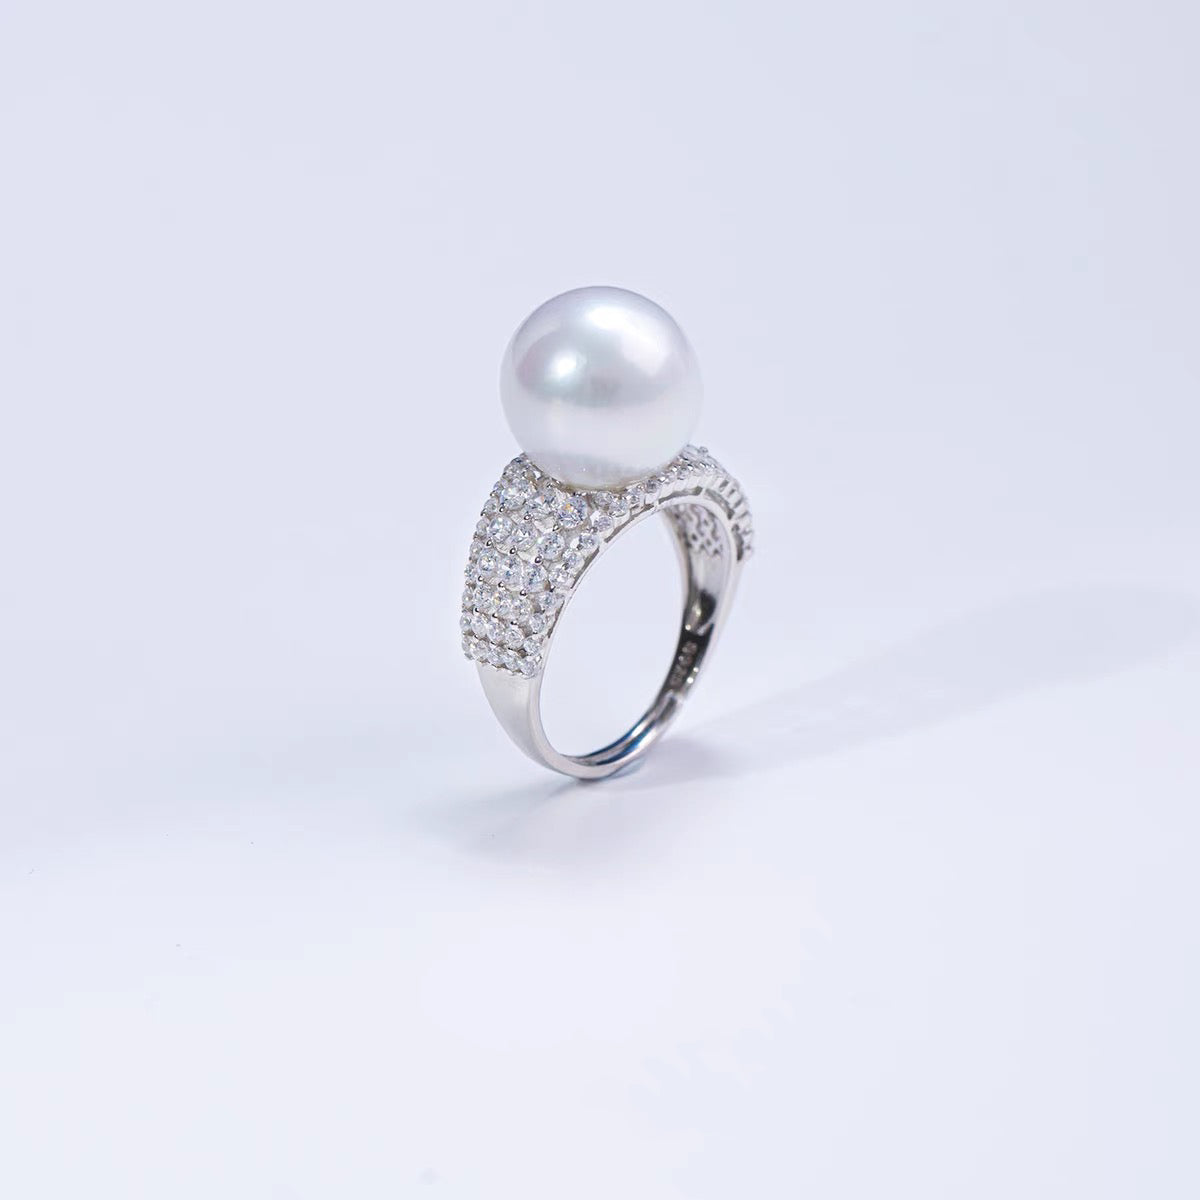 12.0-12.5 mm White Freshwater Pearl and Diamond Ring